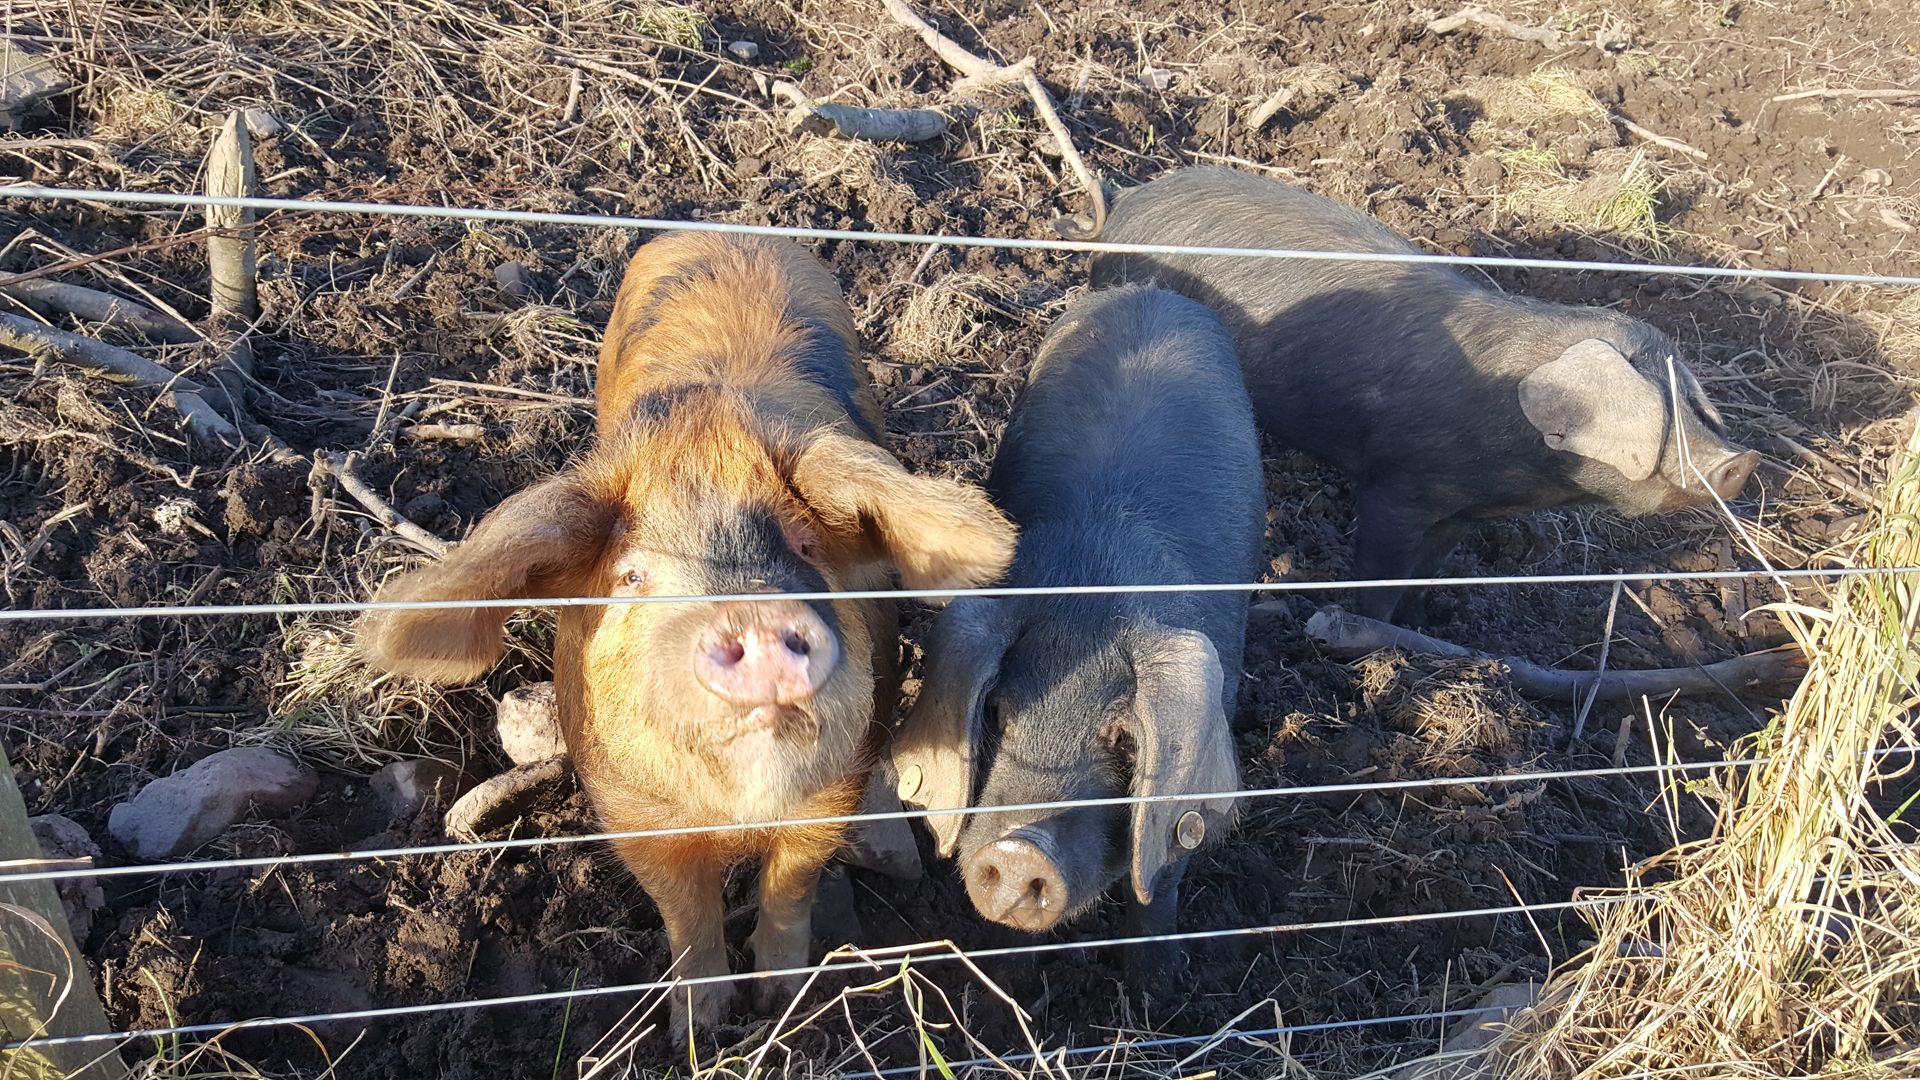 Farm animals (pigs) at Airhouses Luxury Self Catering Lodges in Scottish Borders